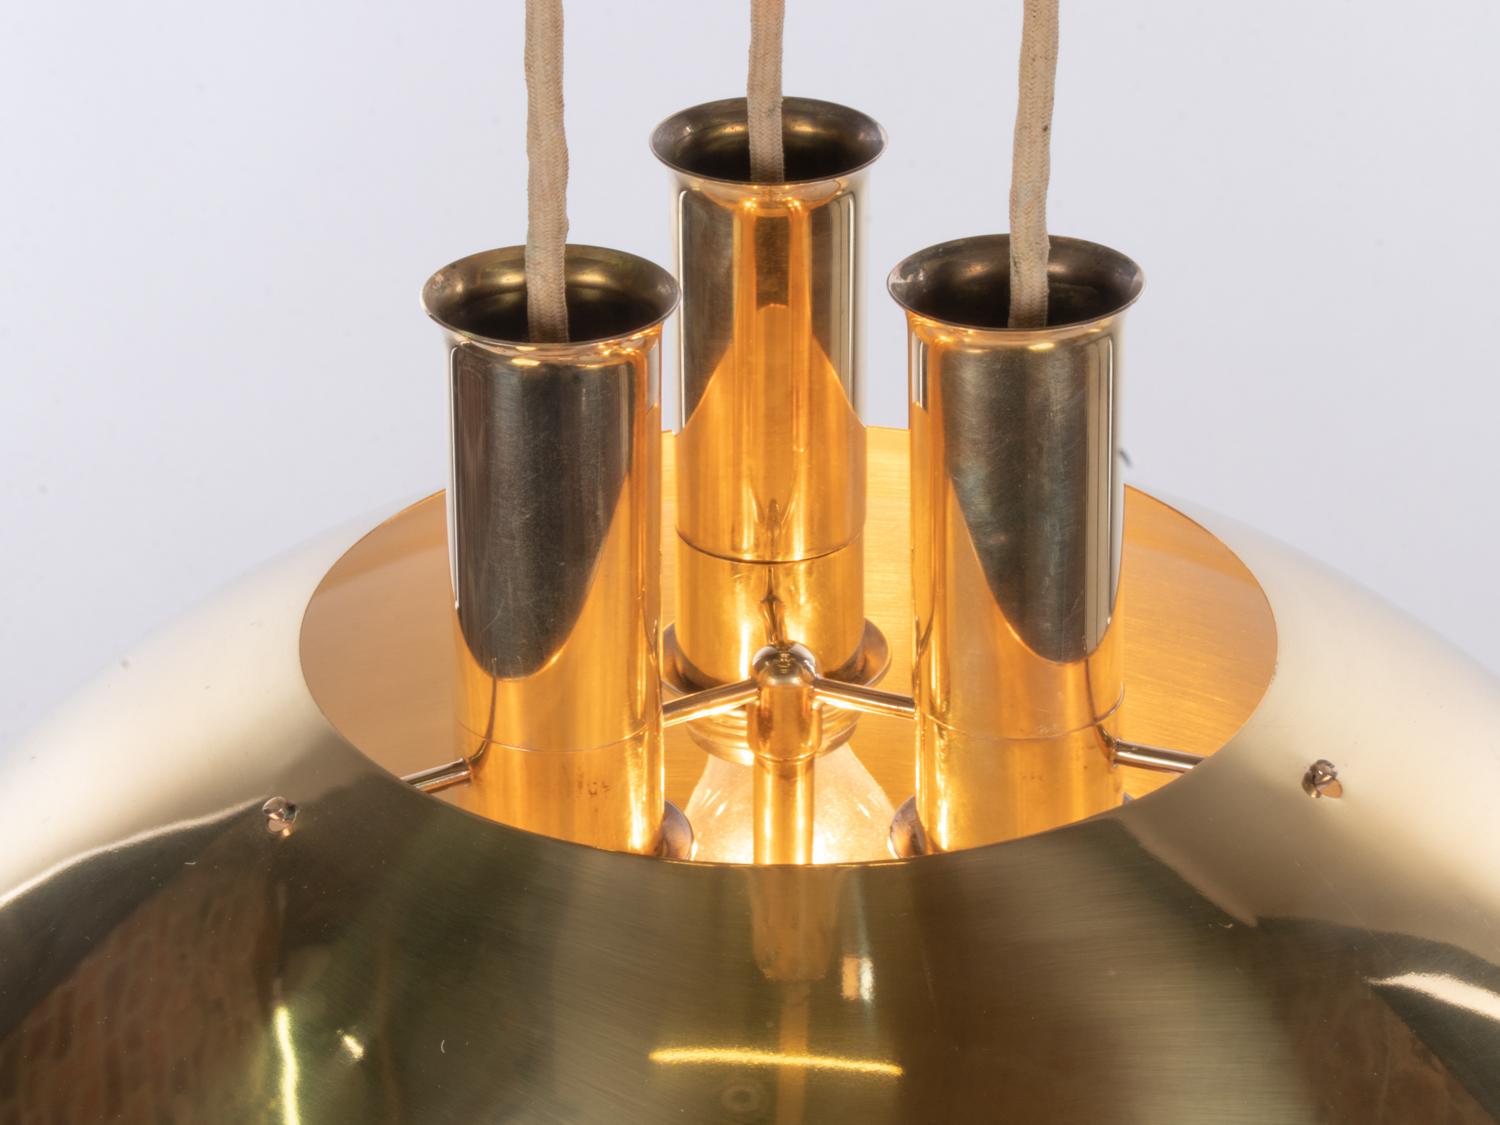 Elegant and very rare, early version of this large counter balance pendant light by Florian Schulz / Licht und Objekt made in Germany in the 1950s.

Adjustable construction made of polished brass, equipped with a fabric cable, brass ball